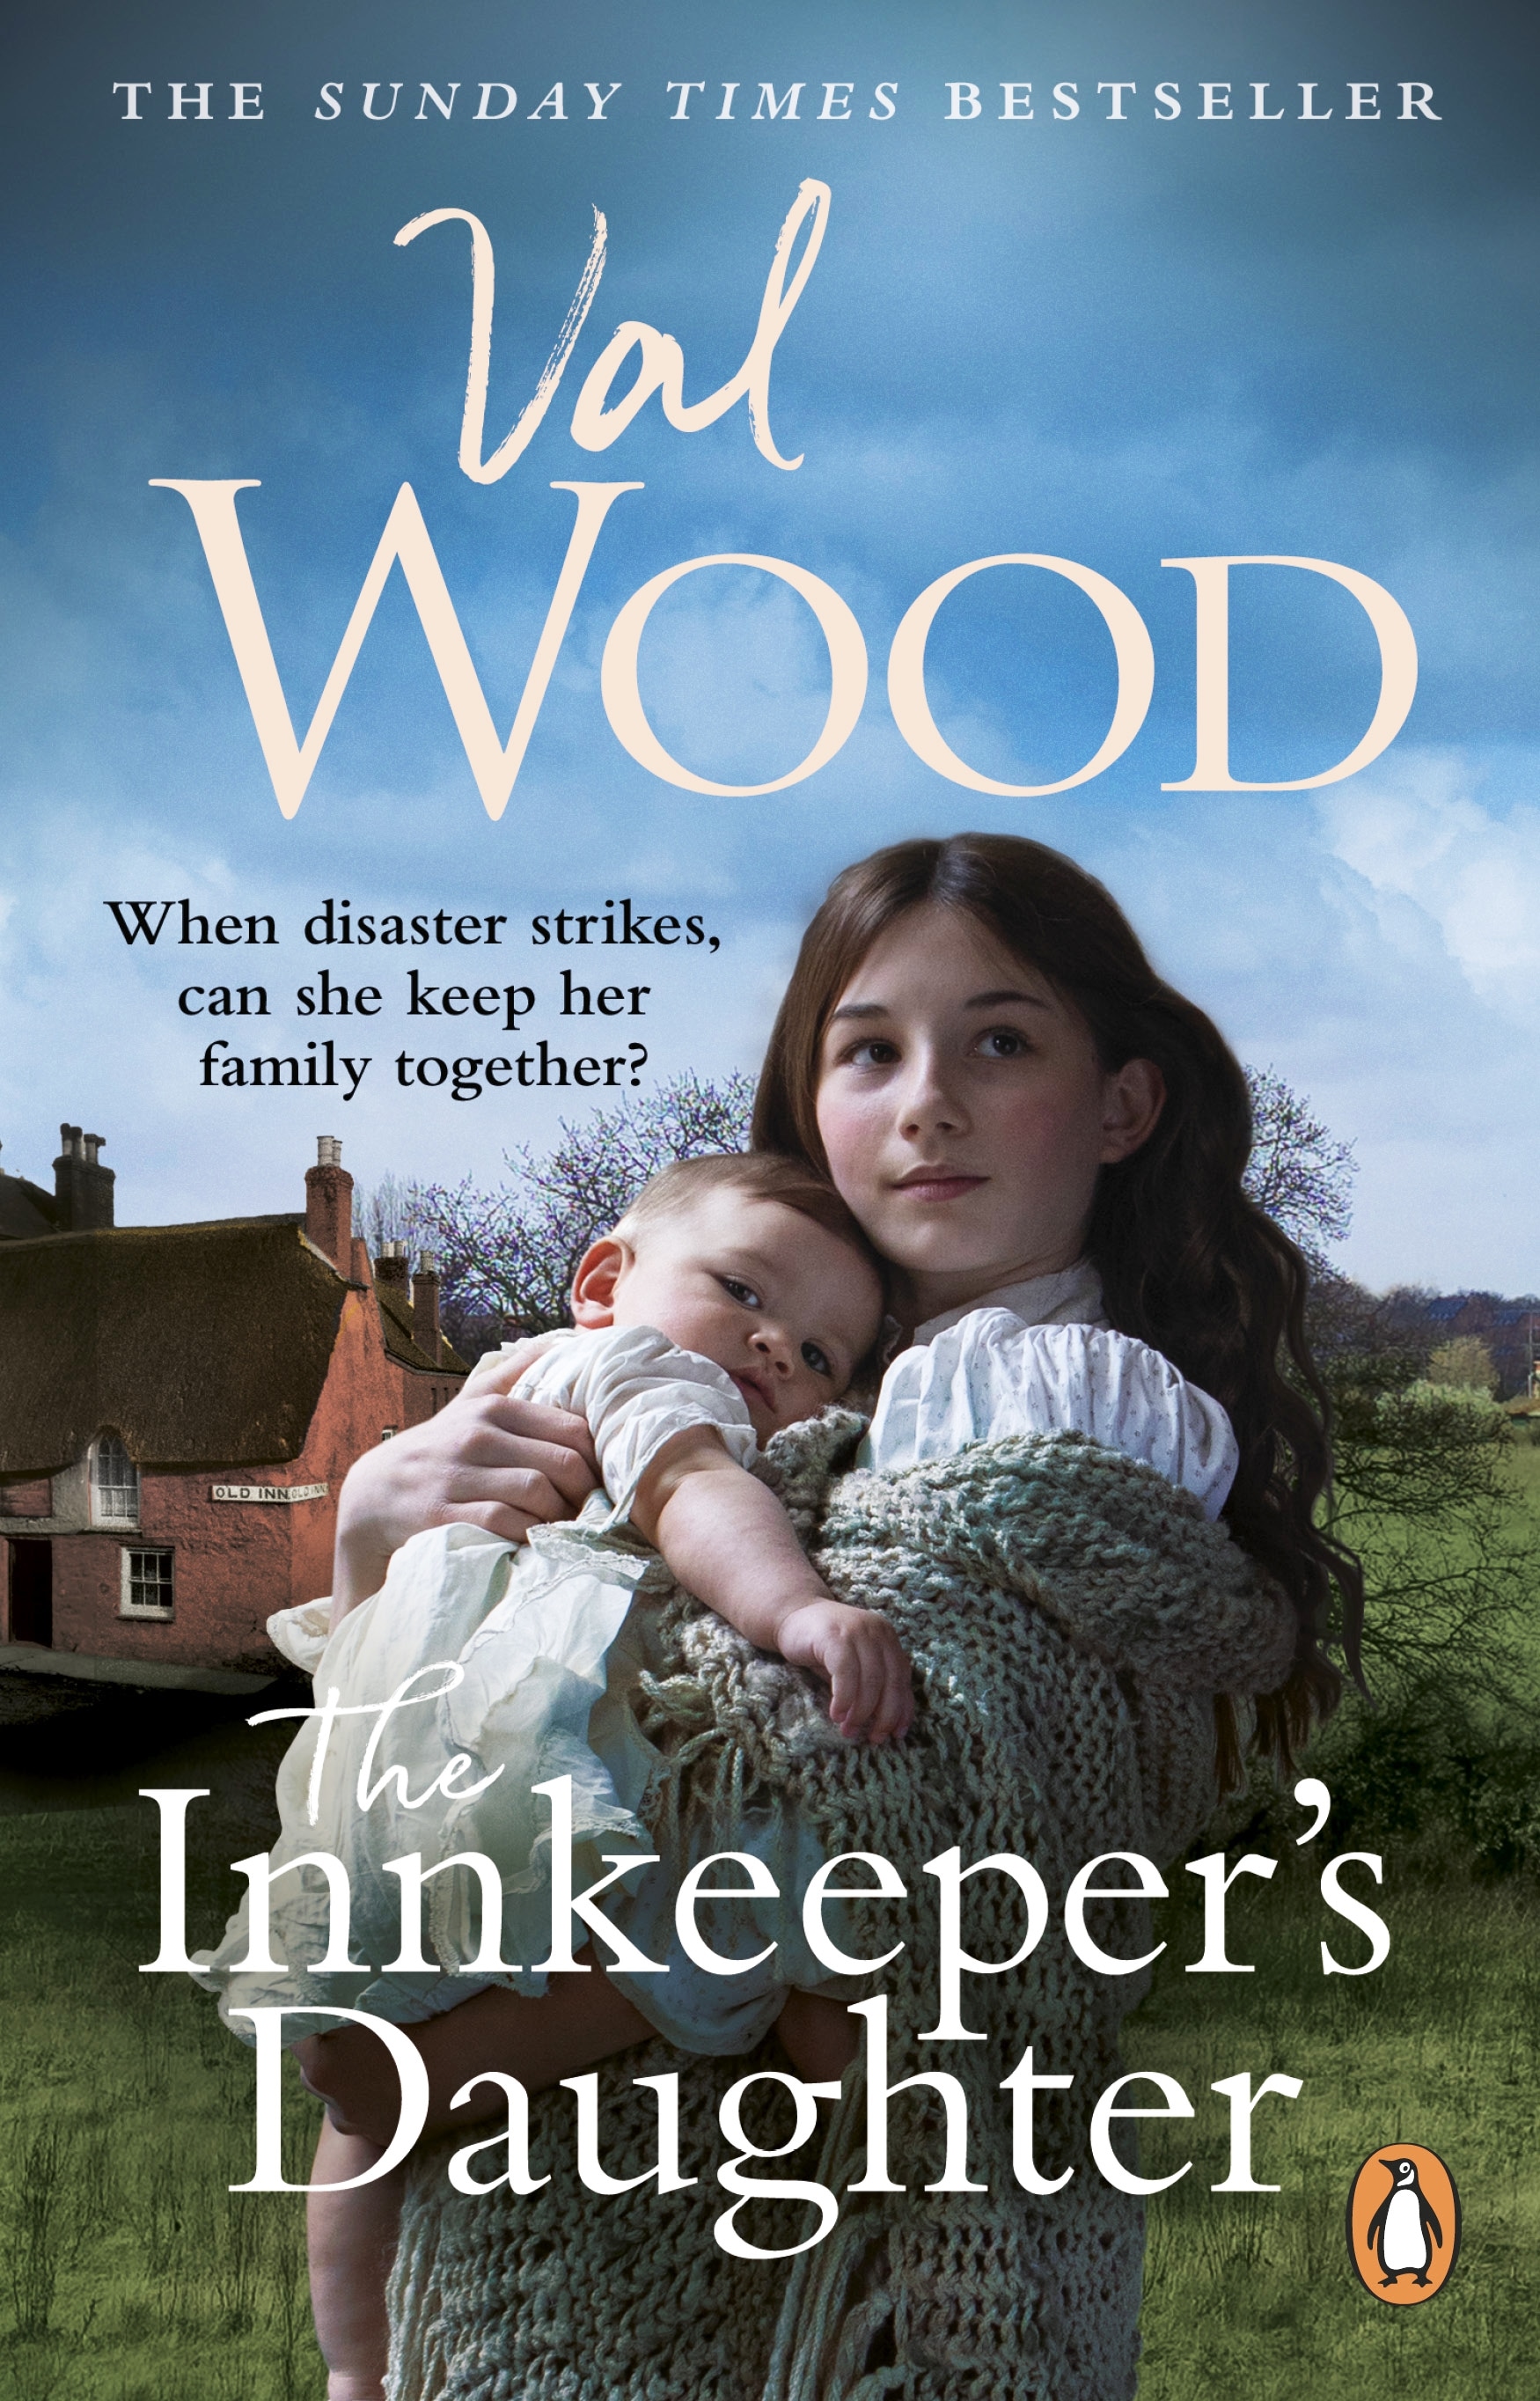 Book “The Innkeeper's Daughter” by Val Wood — July 8, 2021